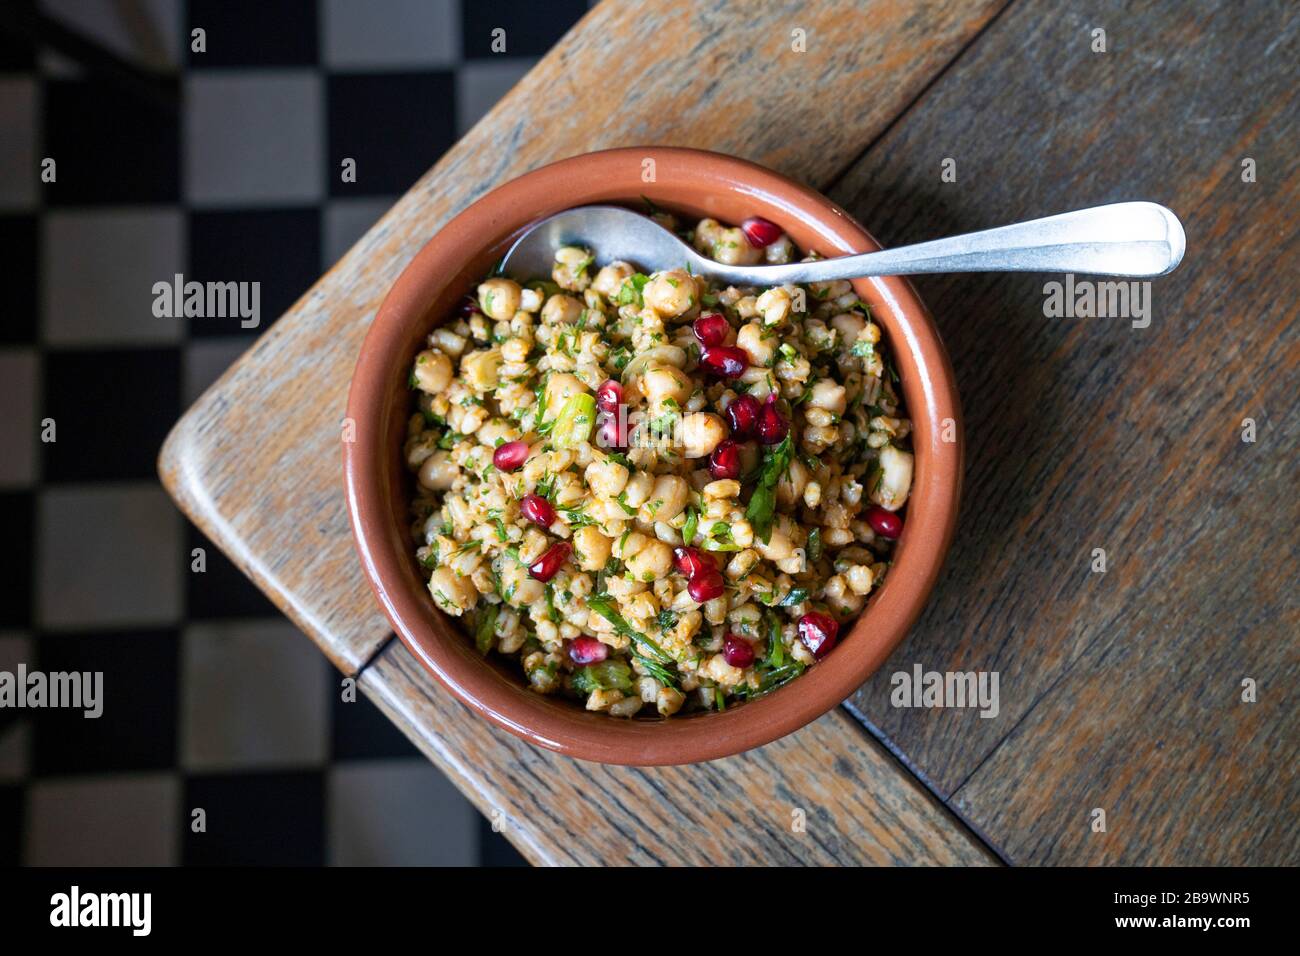 Bulgar wheat and chickpea pilaf with dill Middle Eastern salad Stock Photo